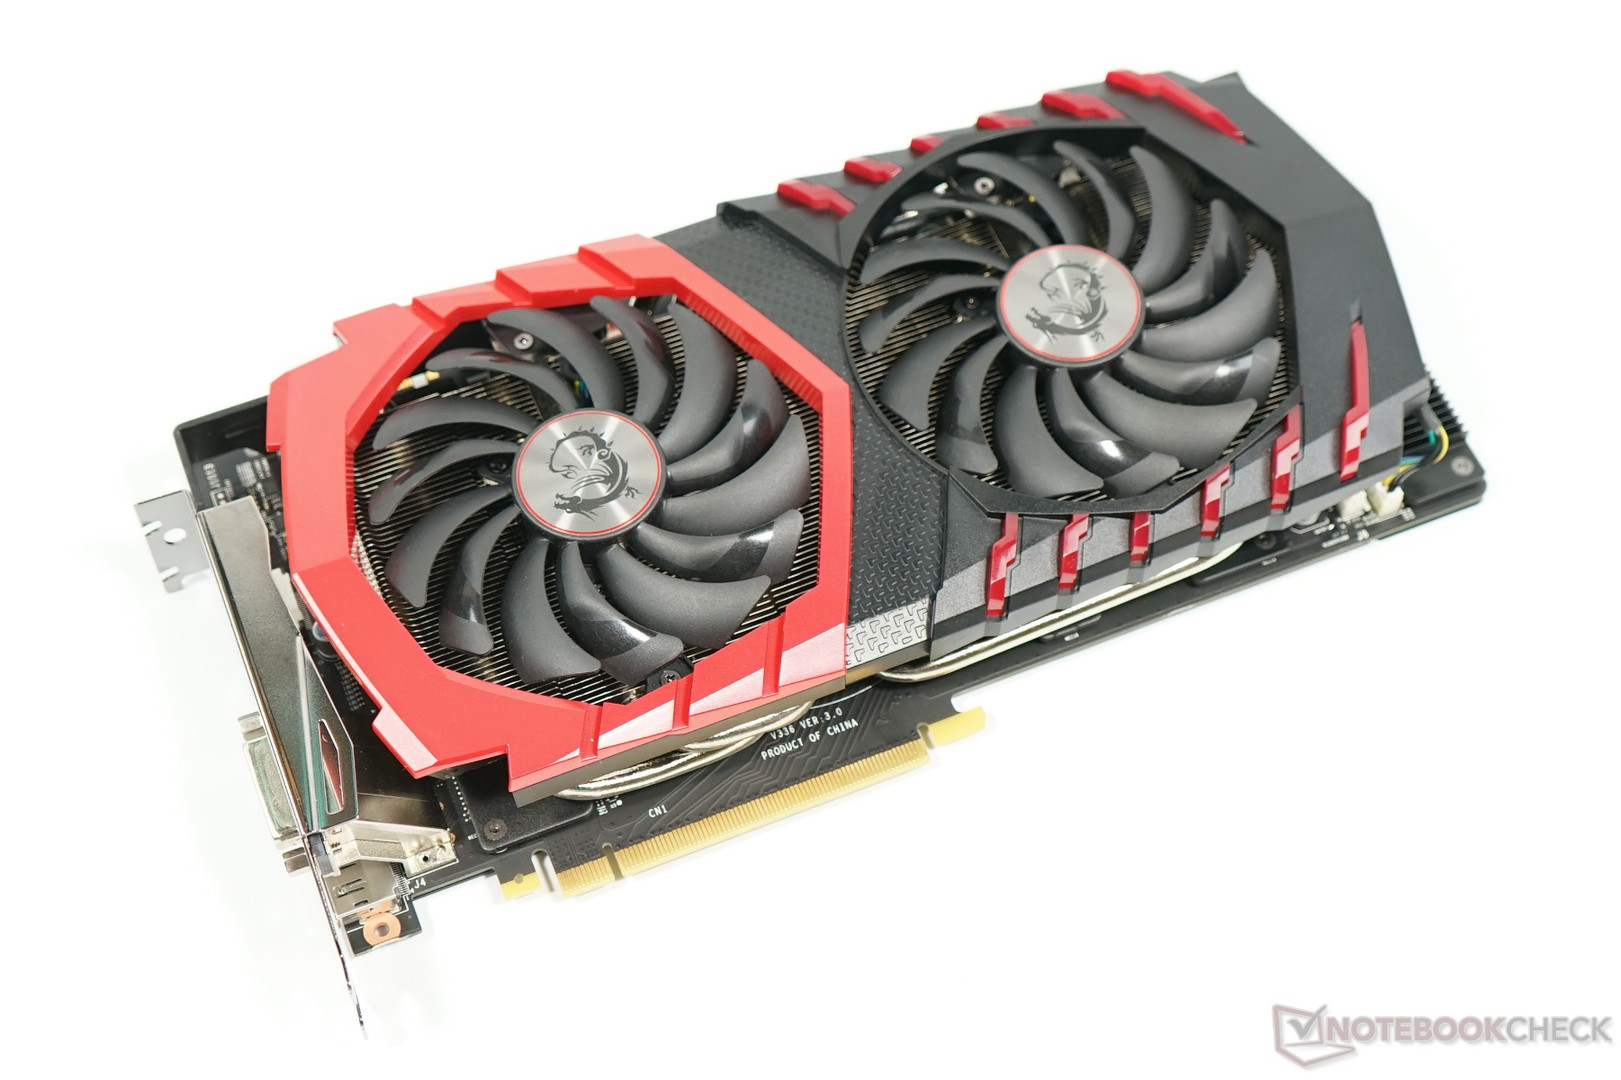 Msi Geforce Gtx 1080 Gaming X 8g Review Notebookcheck Net Reviews